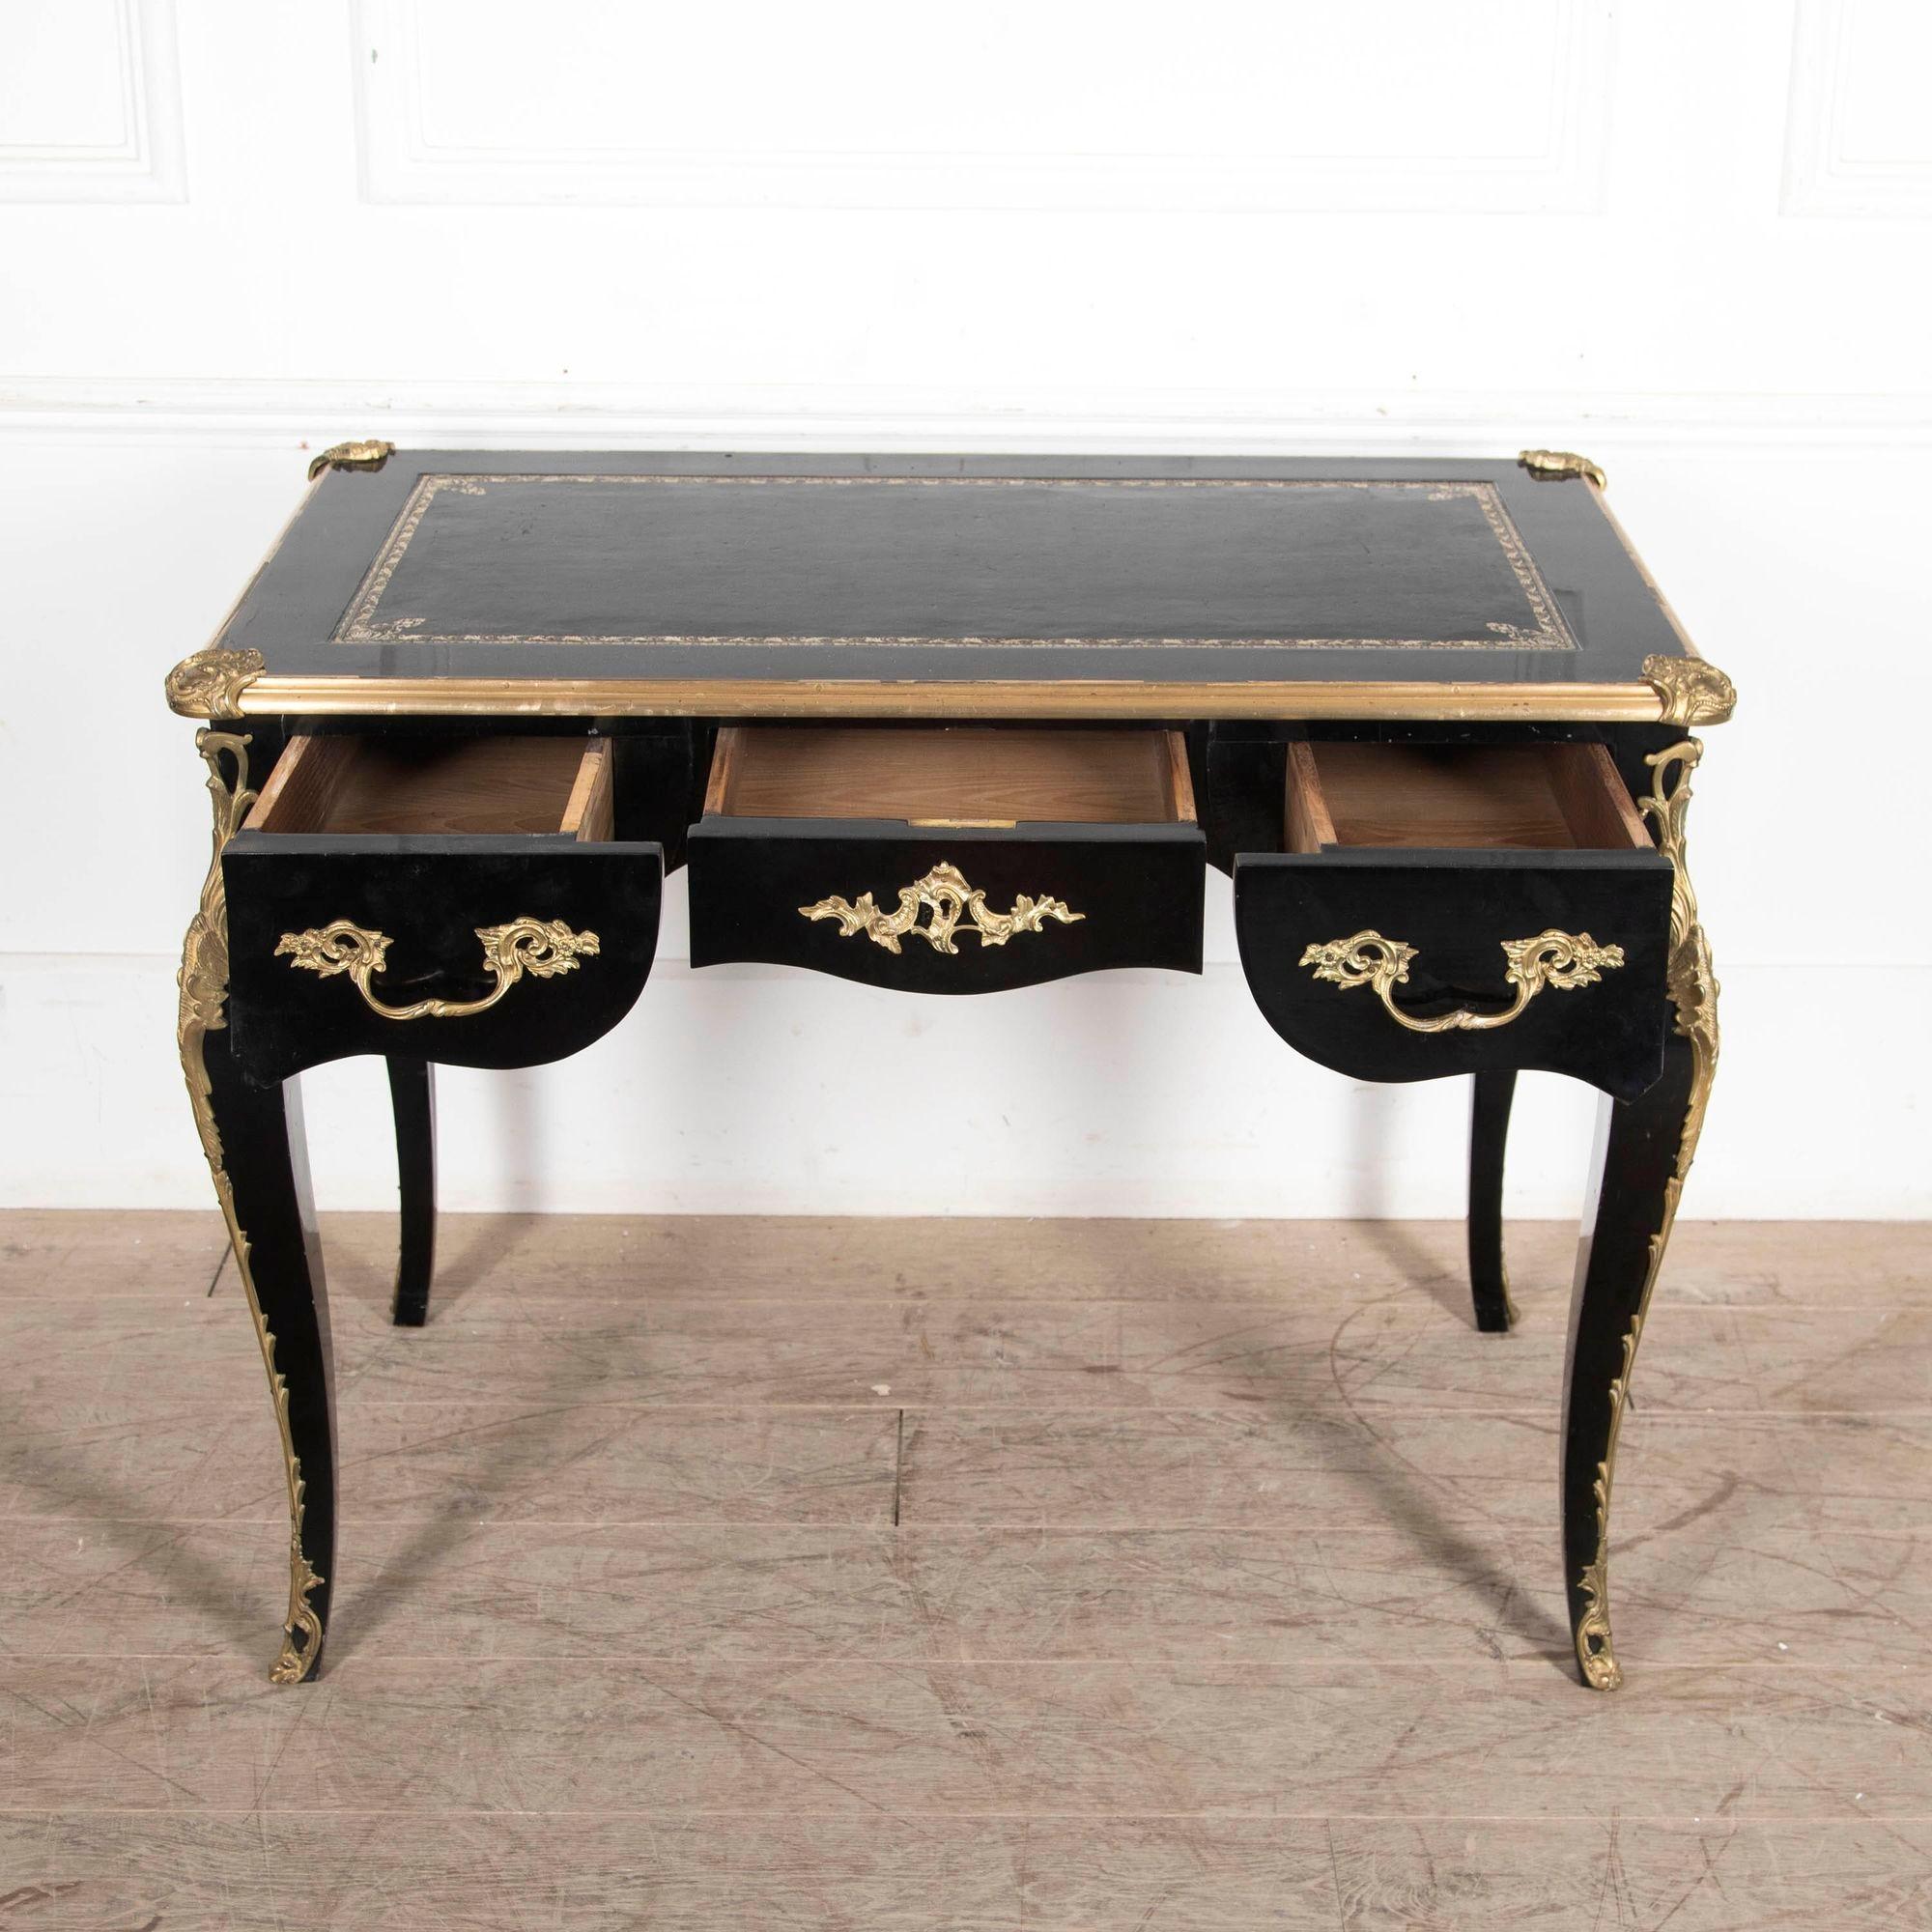 Fabulous black lacquered and ormolu mounted bureau plat, attributed to Maison Jansen.
A chic double-sided free-standing bureau writing table.
Circa 1950.